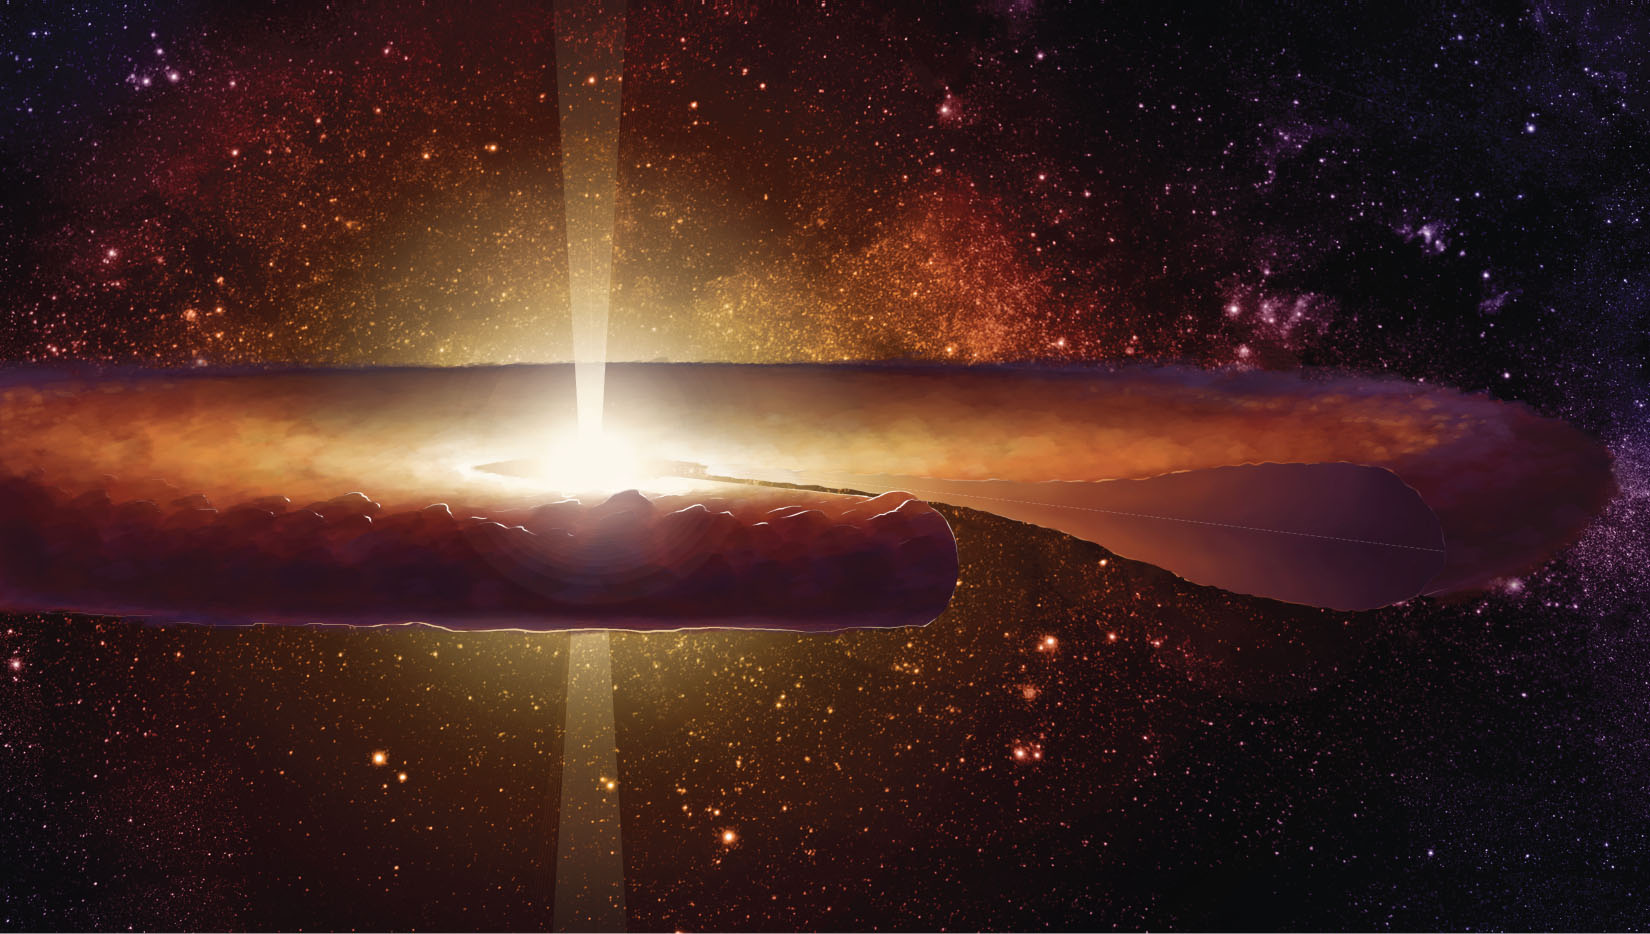 Artist’s illustration of the early solar system, at a time when no planets had formed yet. A swirling cloud of gas and dust surrounded the young sun. The cutaway through this so-called protoplanetary disk shows its three-dimensional structure.